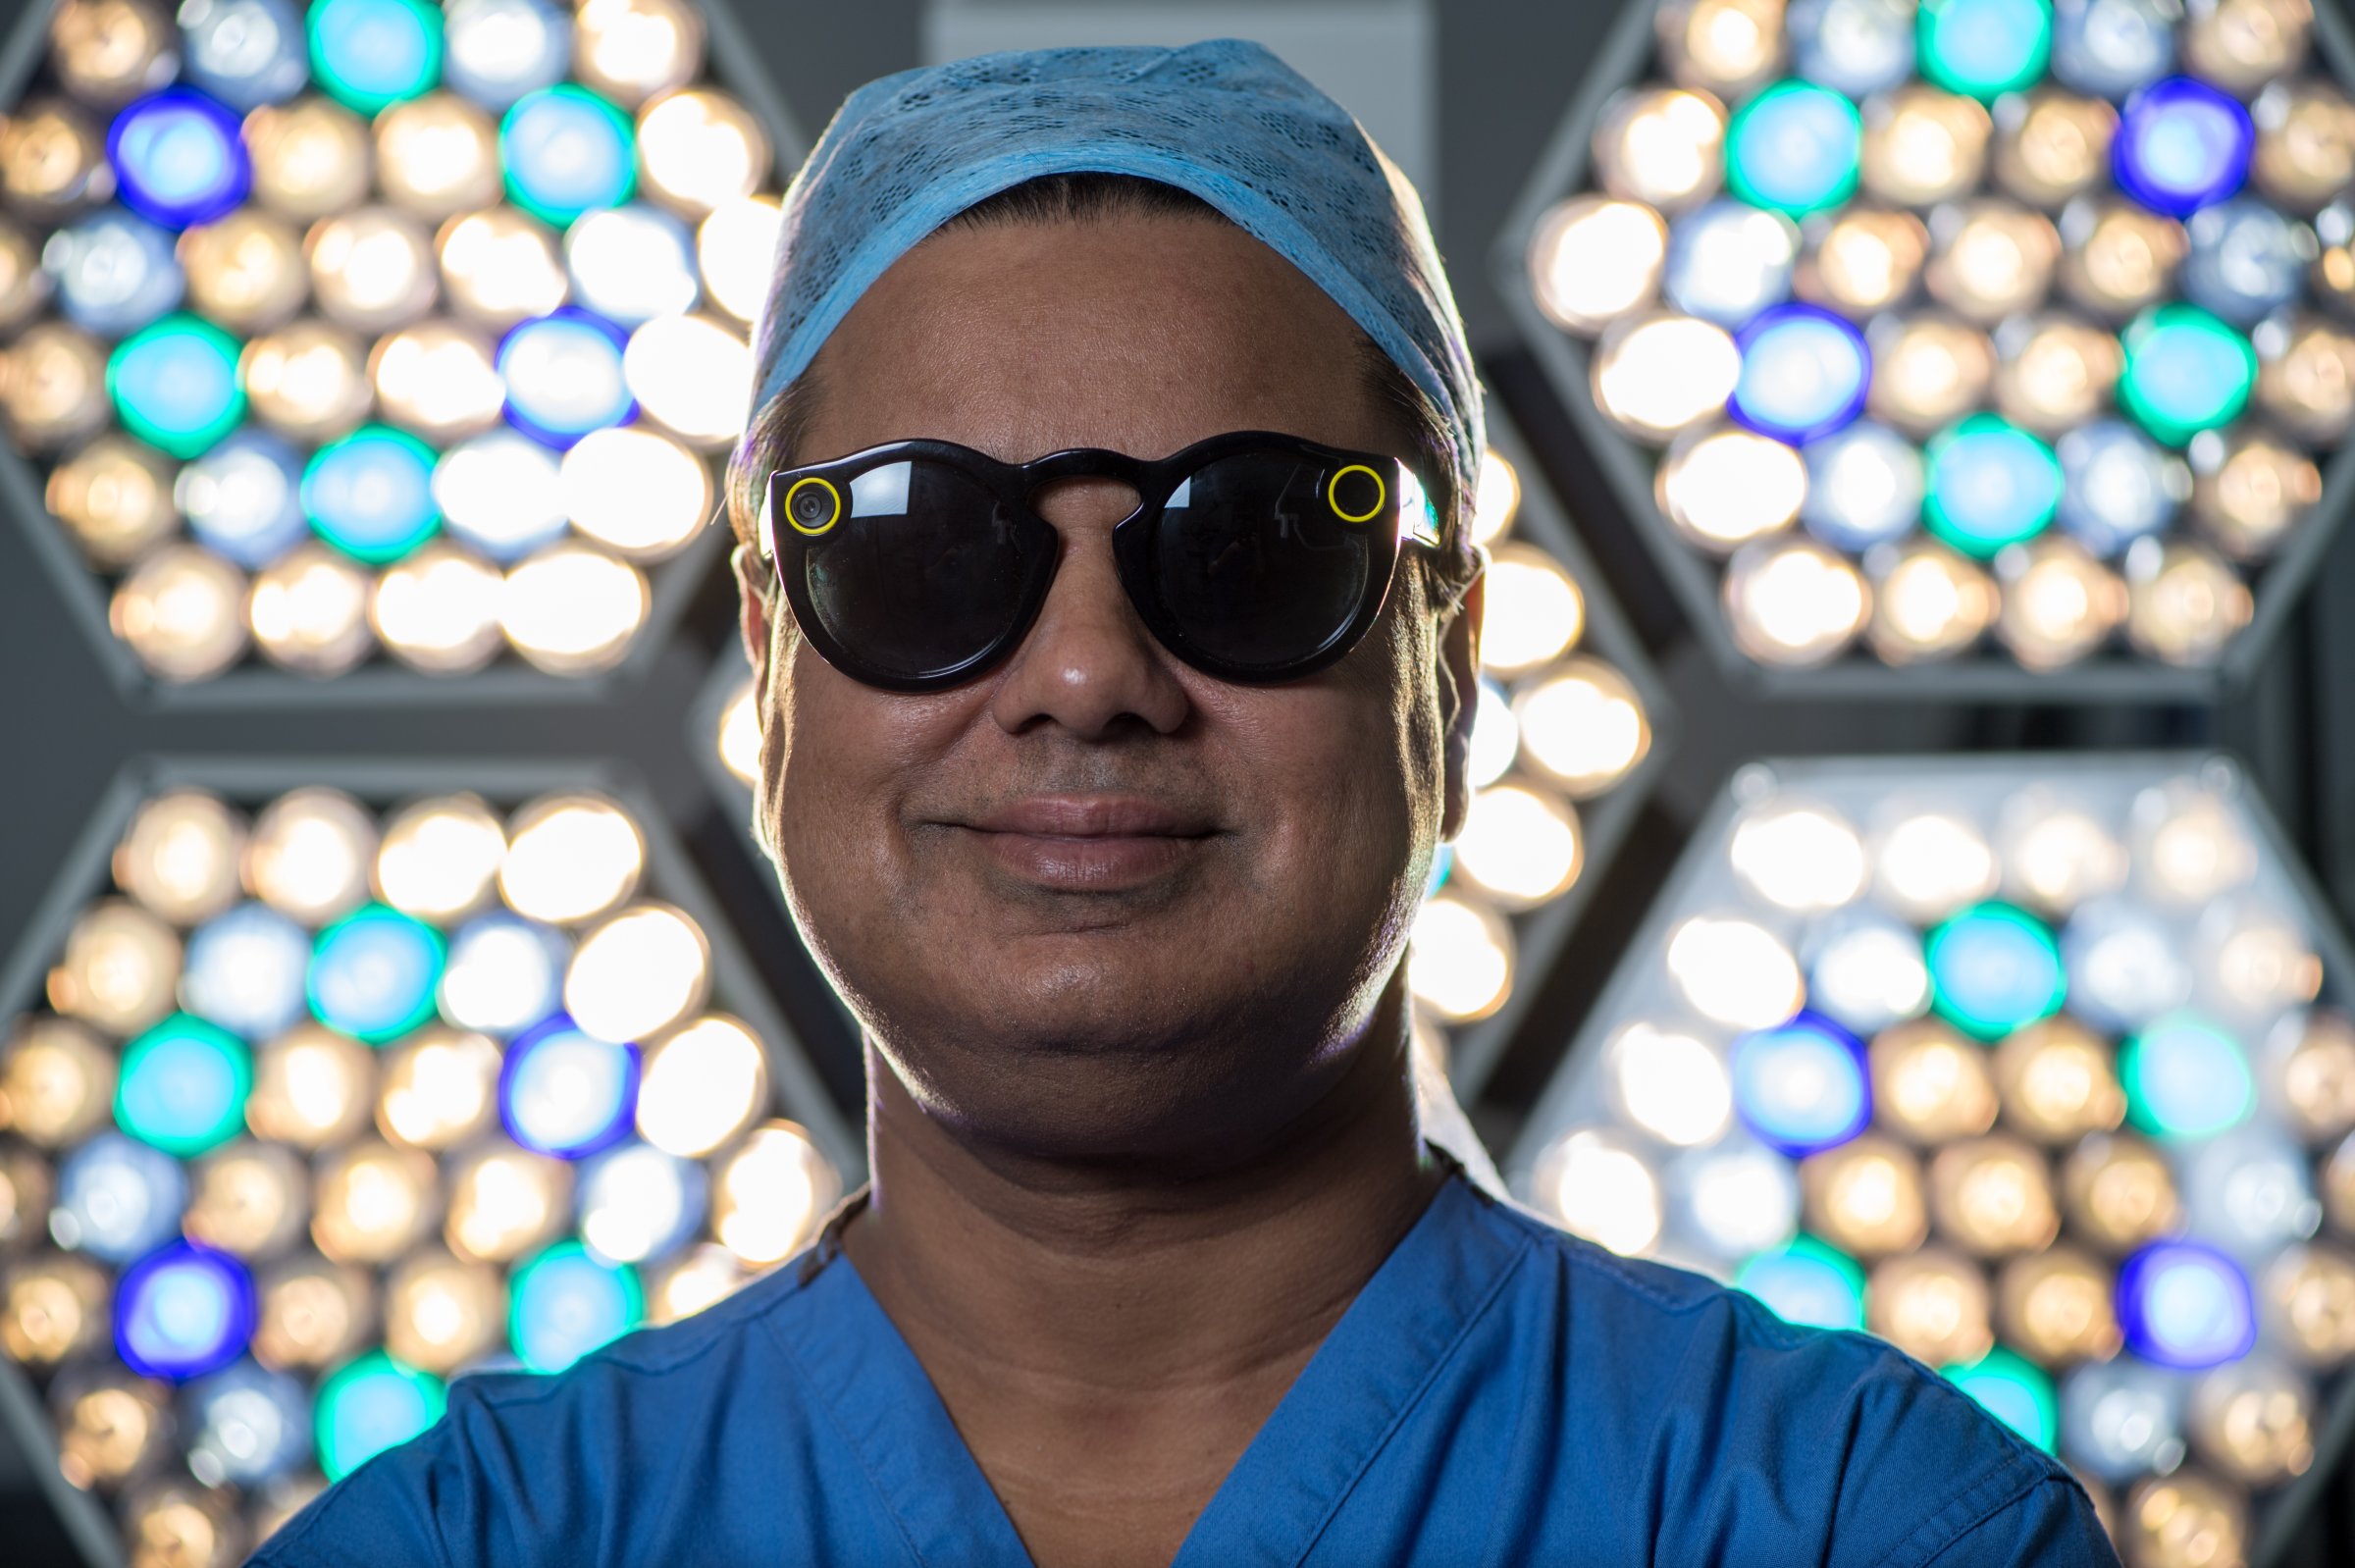 Most-Watched Surgeon Shafi Ahmed And His Digital Eyewear